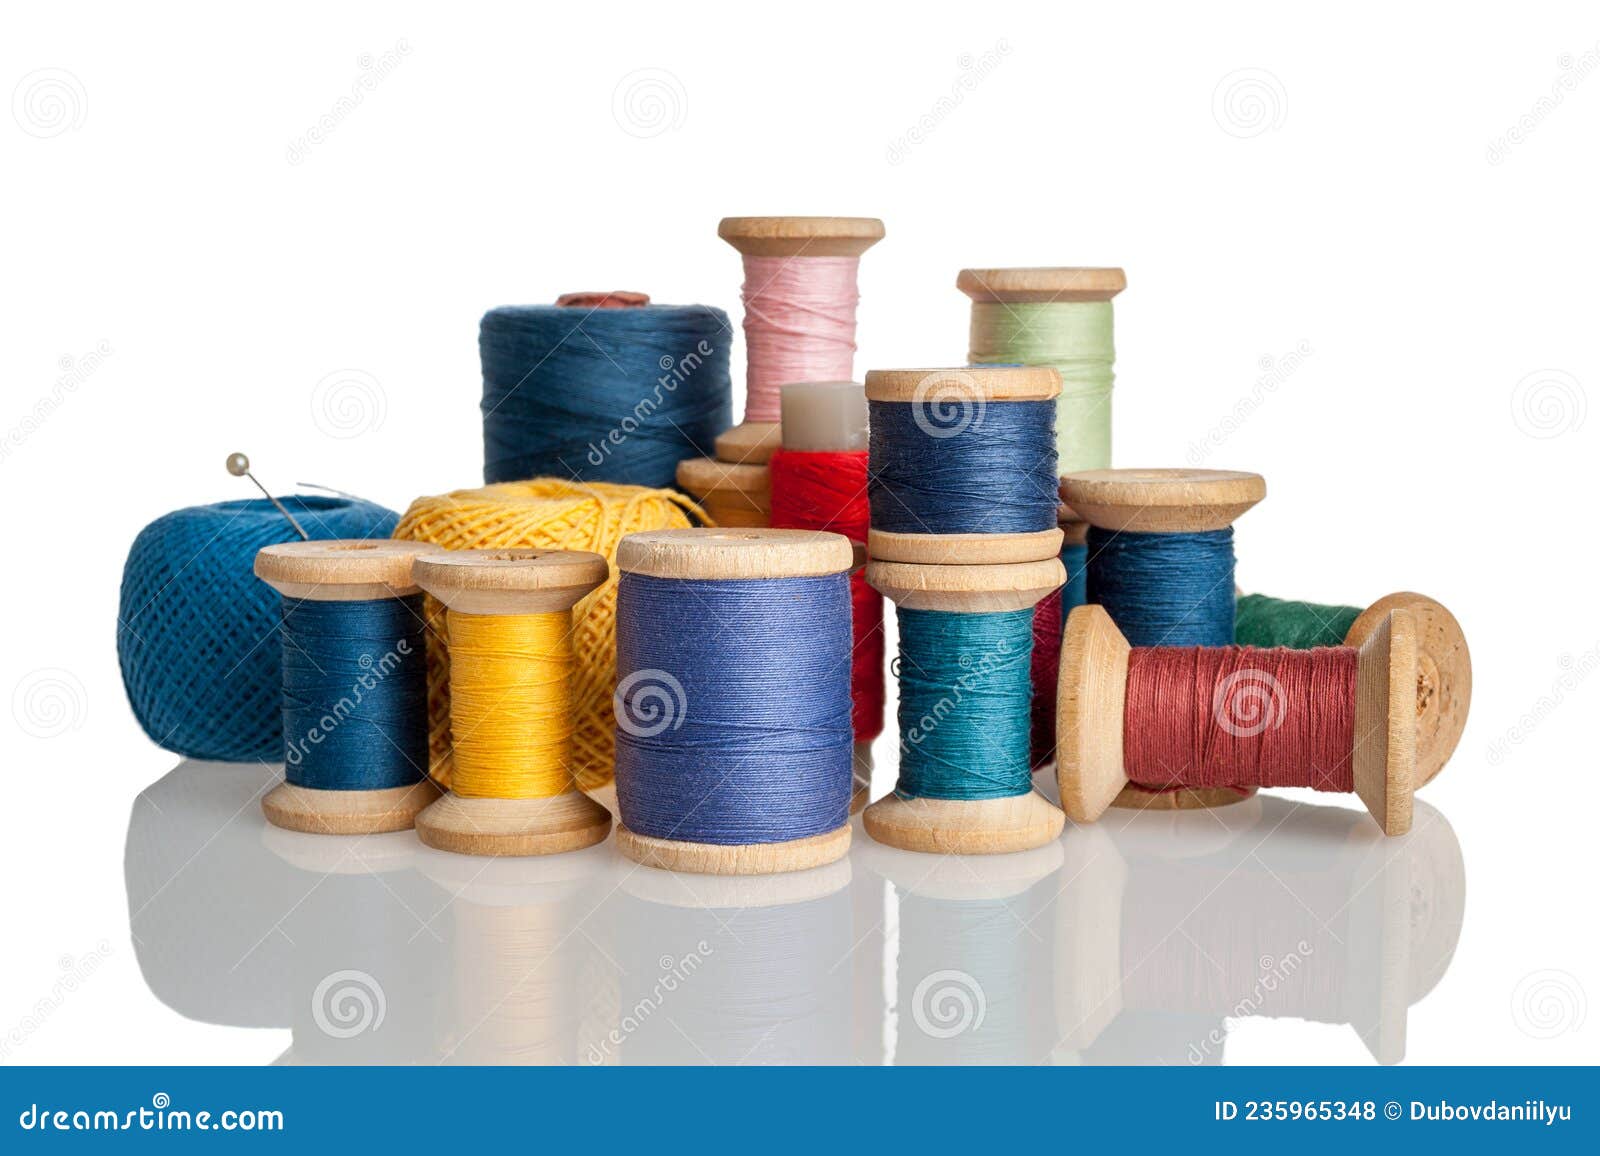 Spools of Thread, Bobbins with Threads of Different Colors and